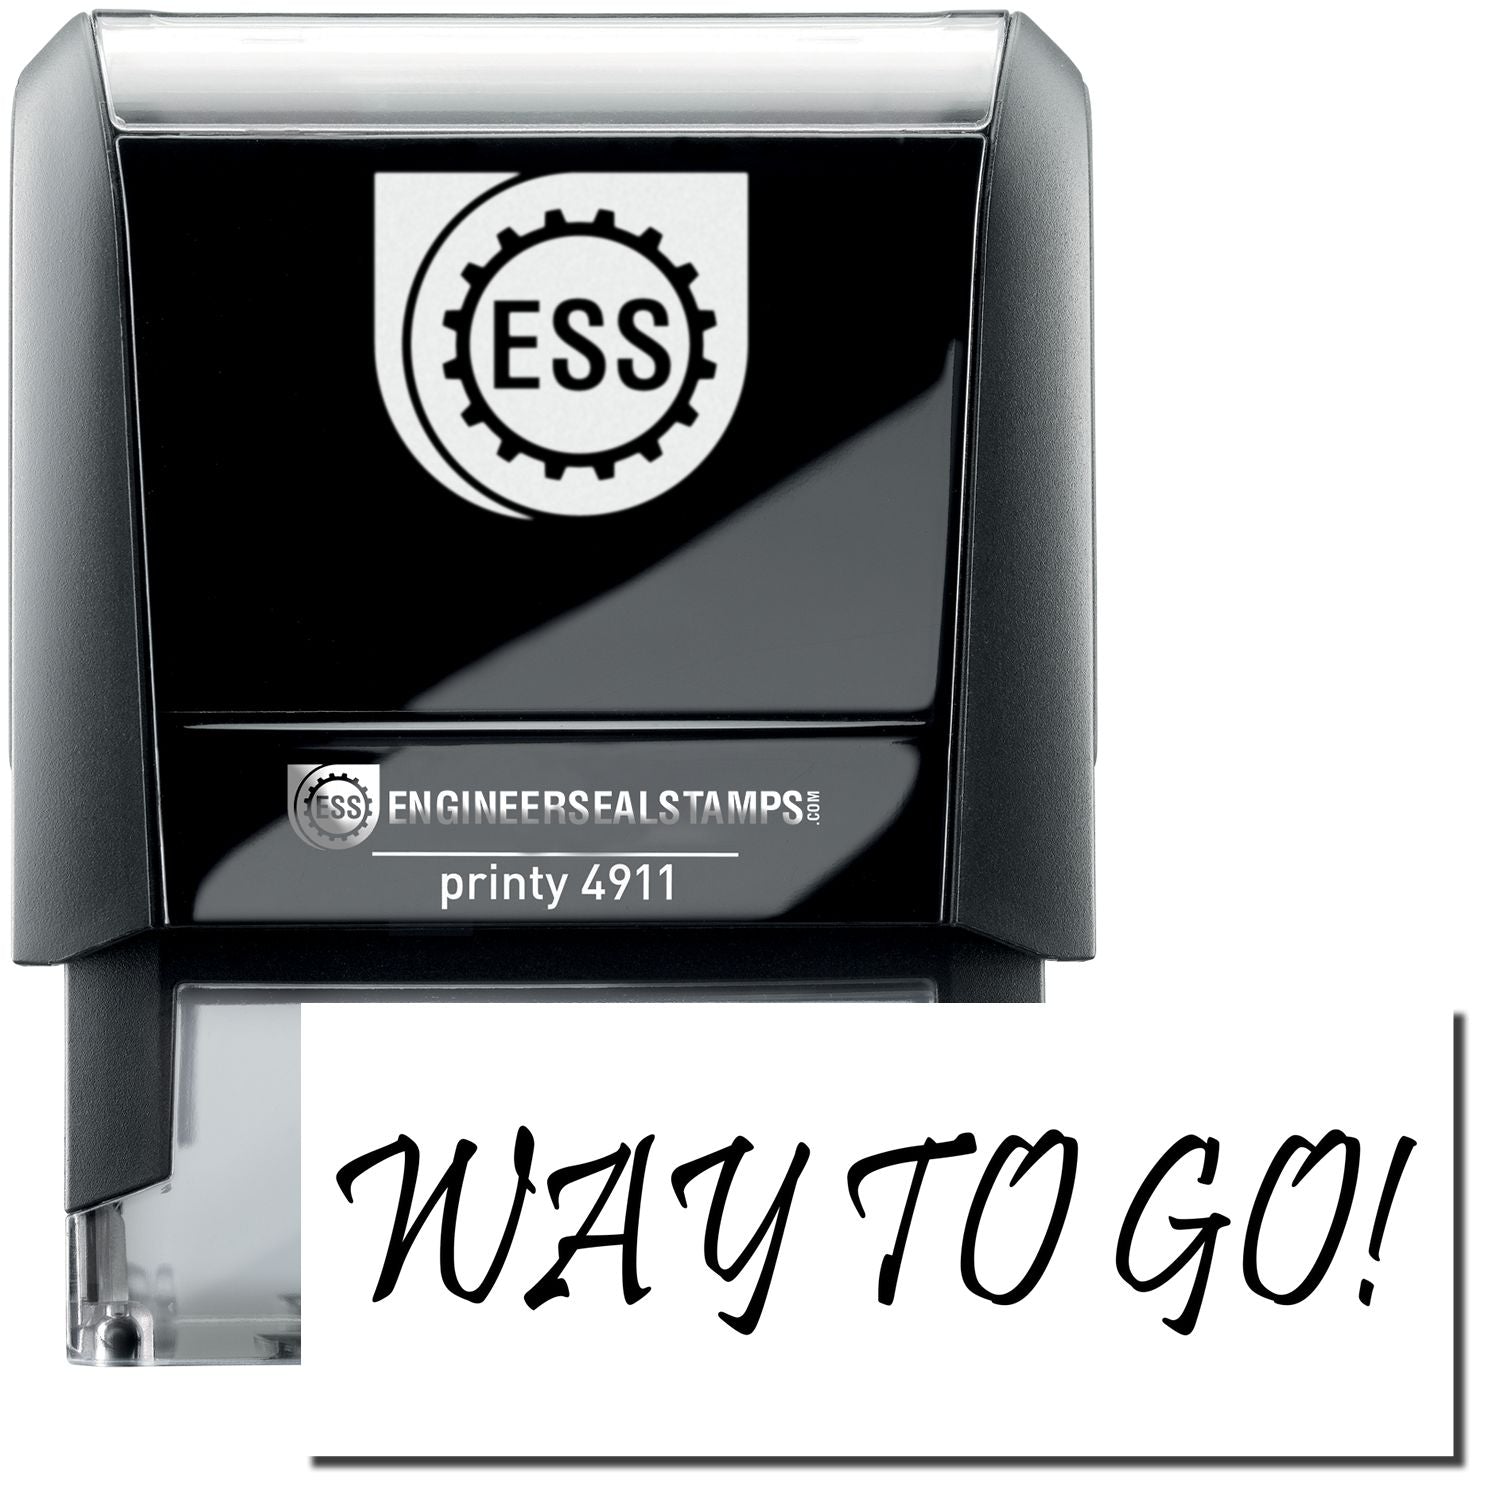 A self-inking stamp with a stamped image showing how the text "WAY TO GO!" is displayed after stamping.